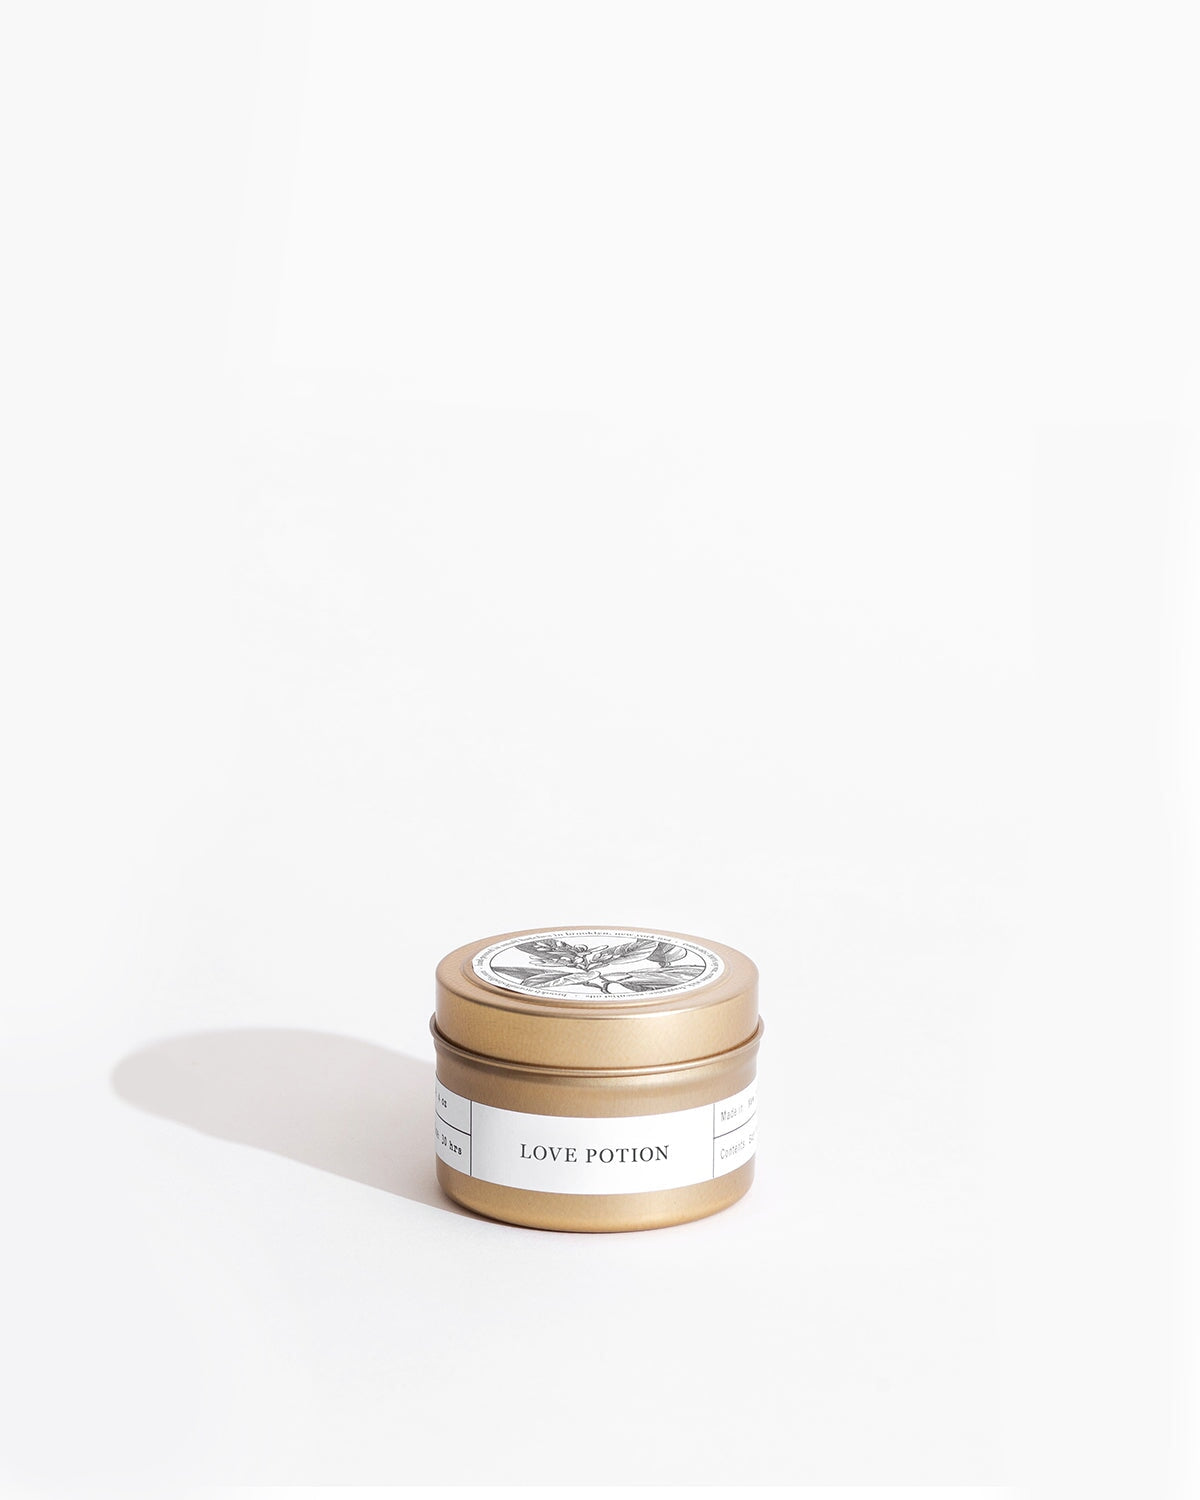 Love Potion Gold Travel Candle by Brooklyn Candle Studio